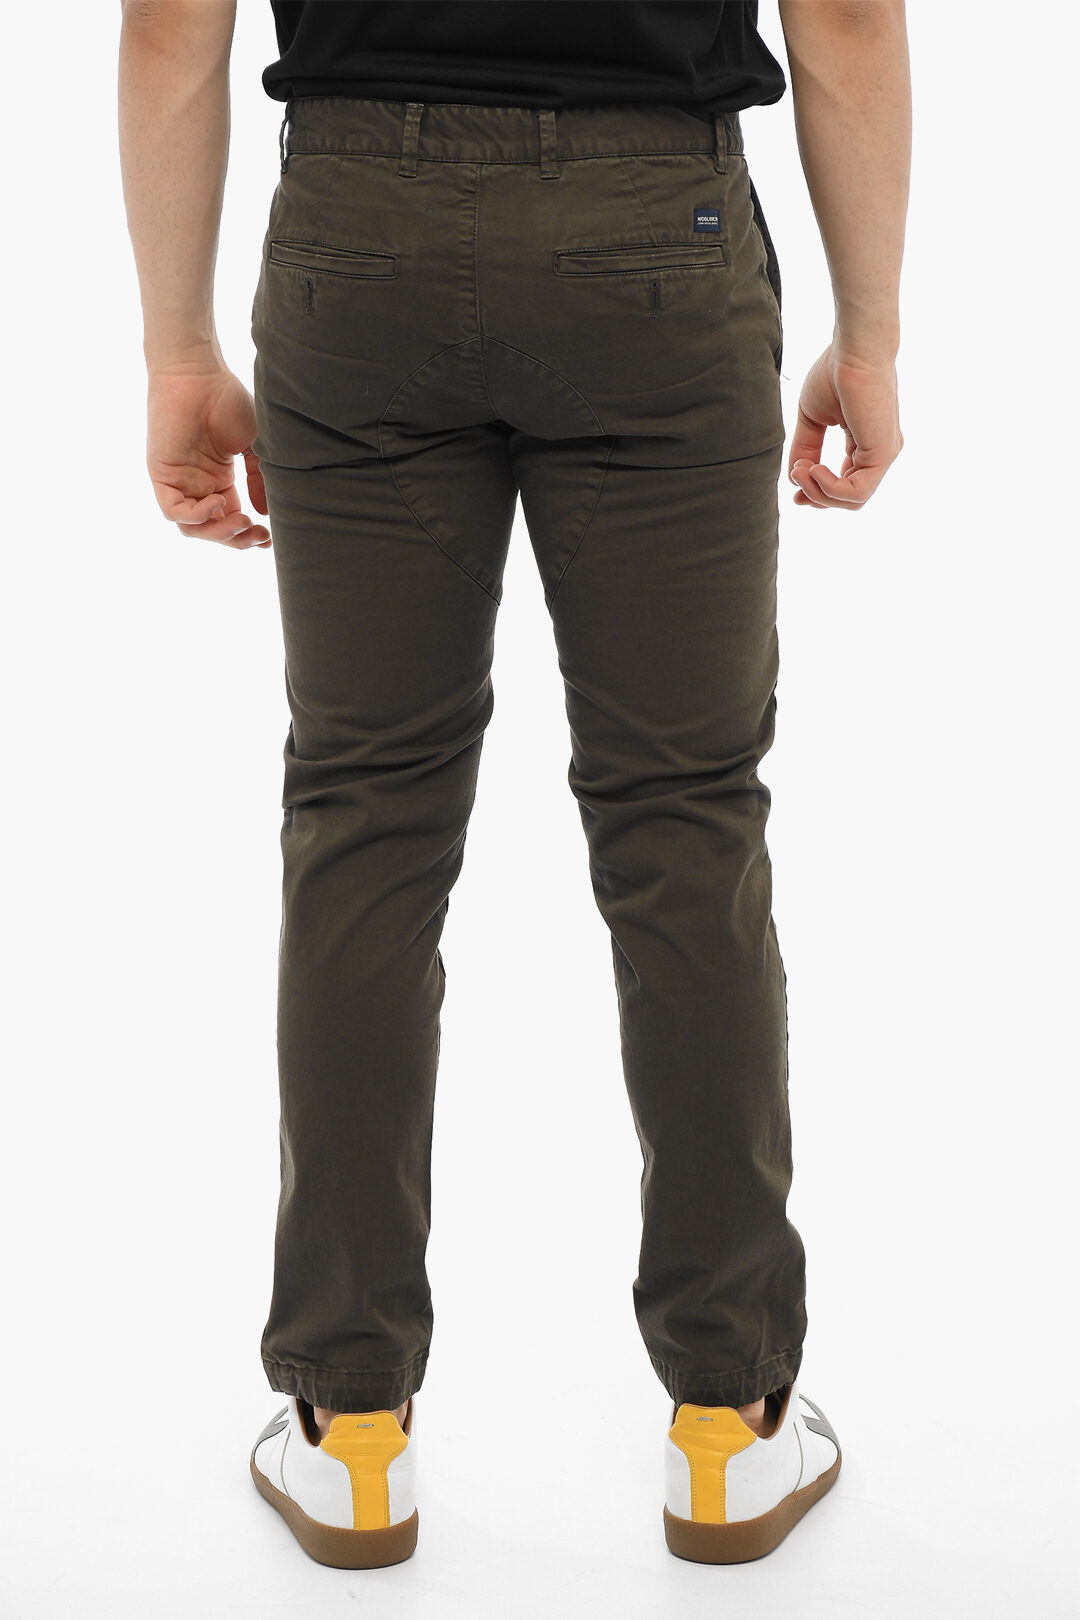 Woolrich Stretch Cotton Chino Pants with Belt Loops men - Glamood Outlet